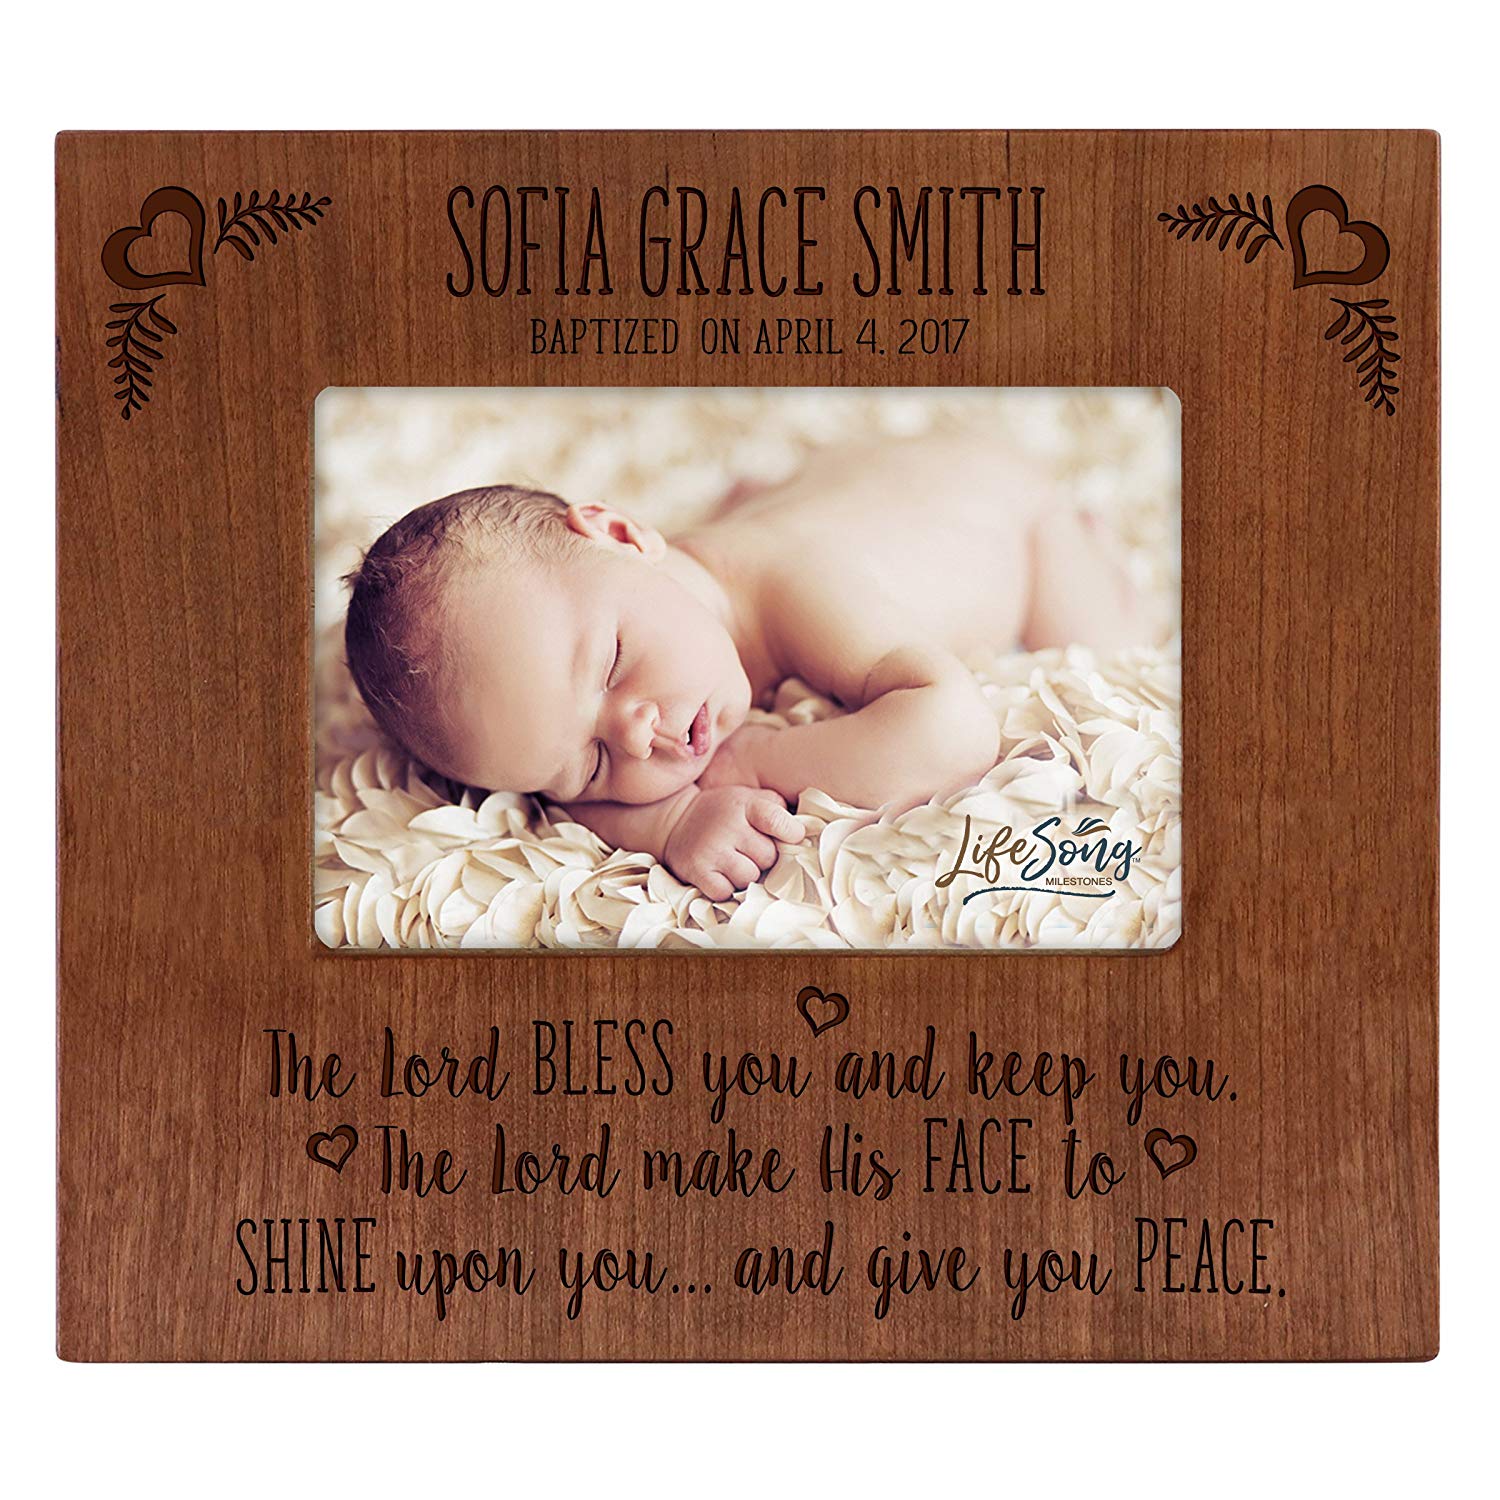 Personalized Baptism Photo Frame - The Lord Bless You - LifeSong Milestones